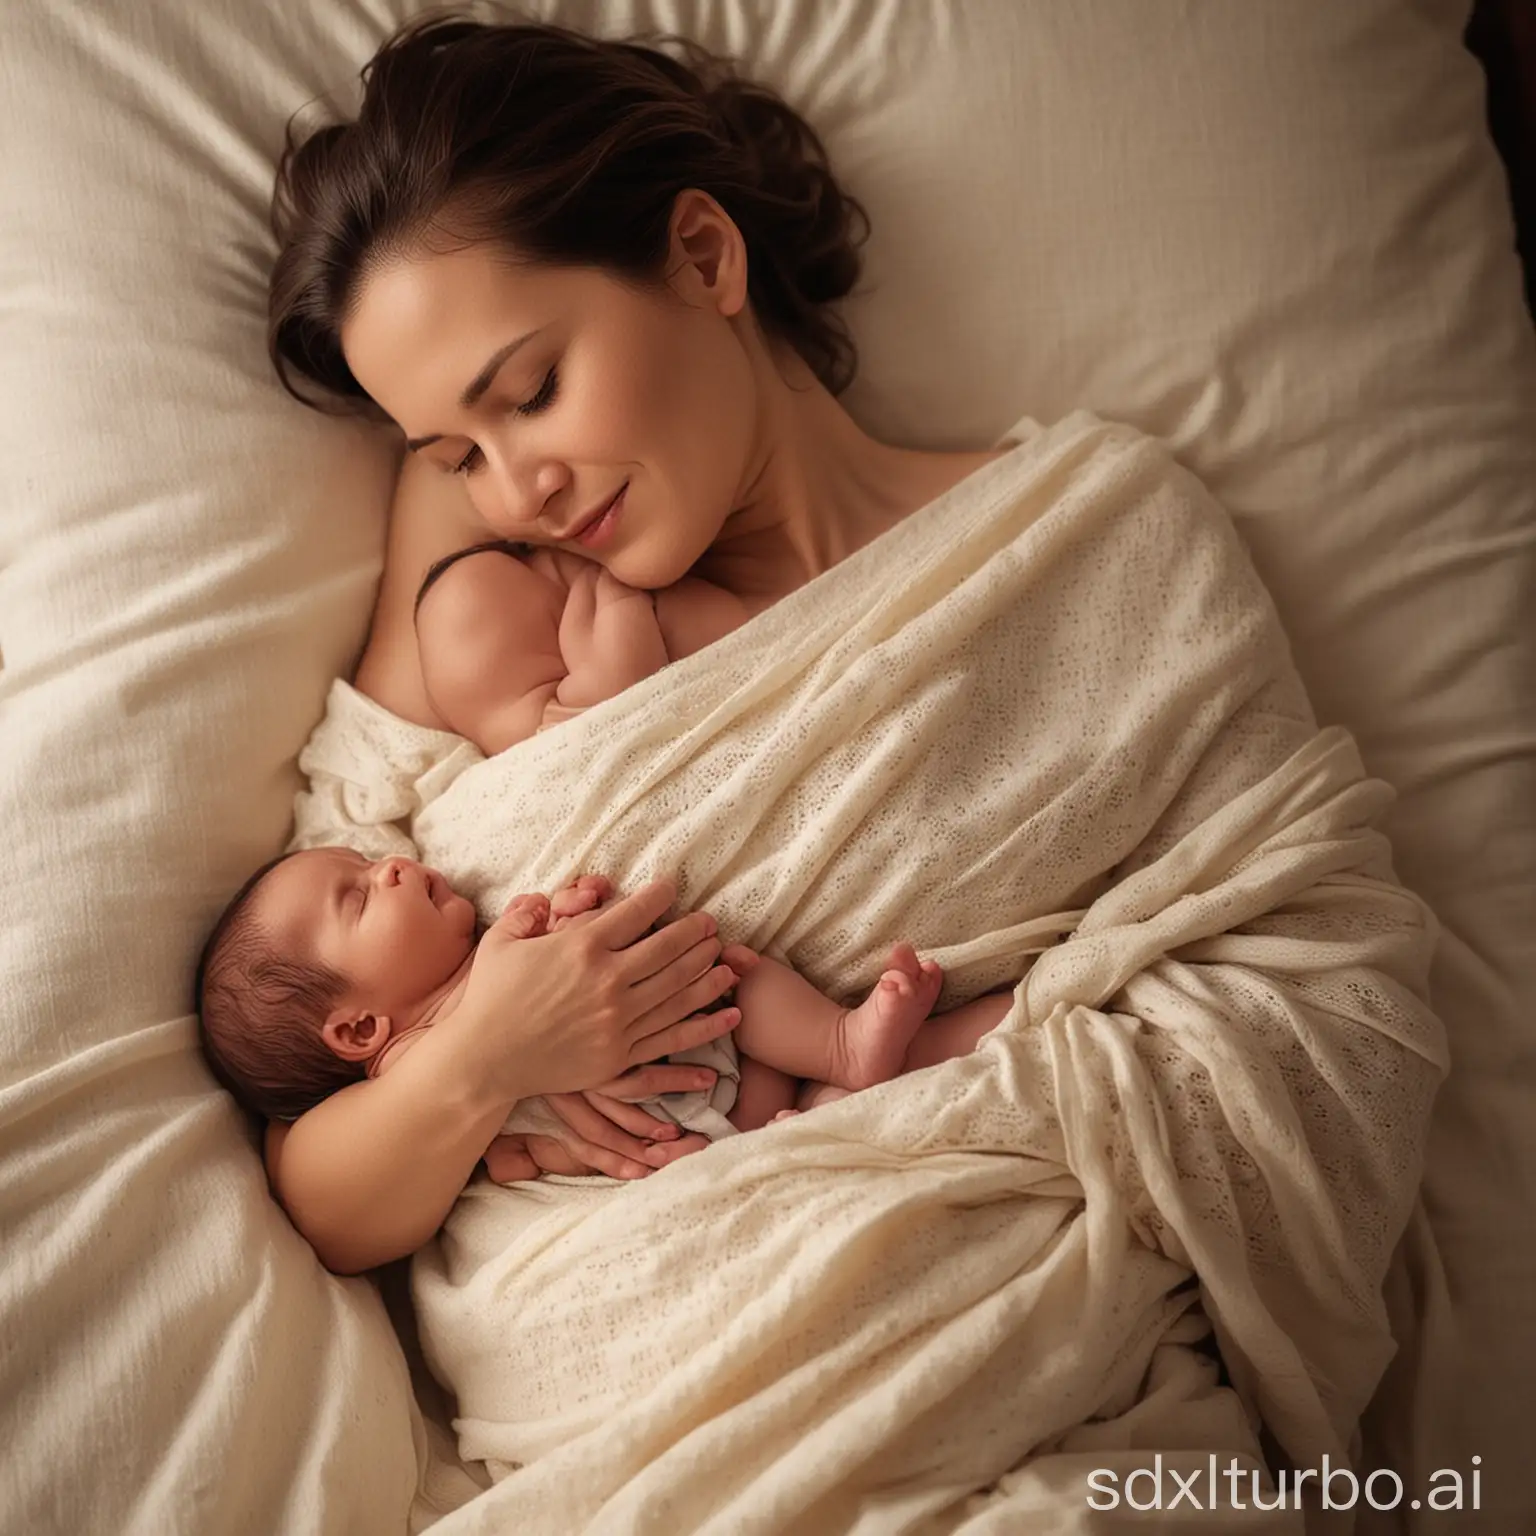 Lullaby in the arms of mother: A baby is gently rocked in the arms of its mother while she sings a soothing lullaby to it. The gentle rocking and familiar voice of the mother make the baby slowly close its eyes and drift off into a deep sleep.